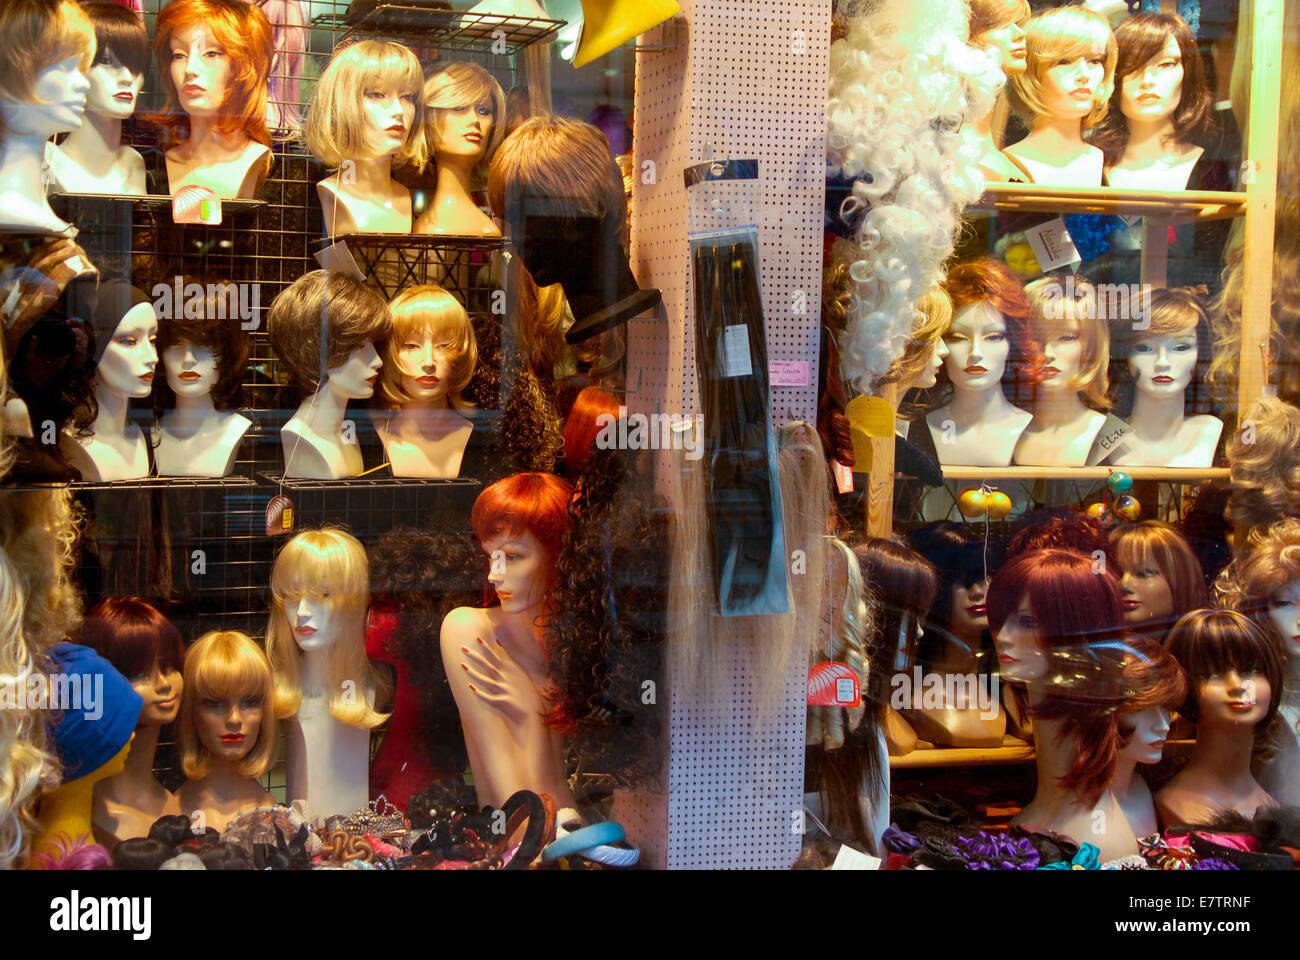 Window display of wigs for sale Stock Photo